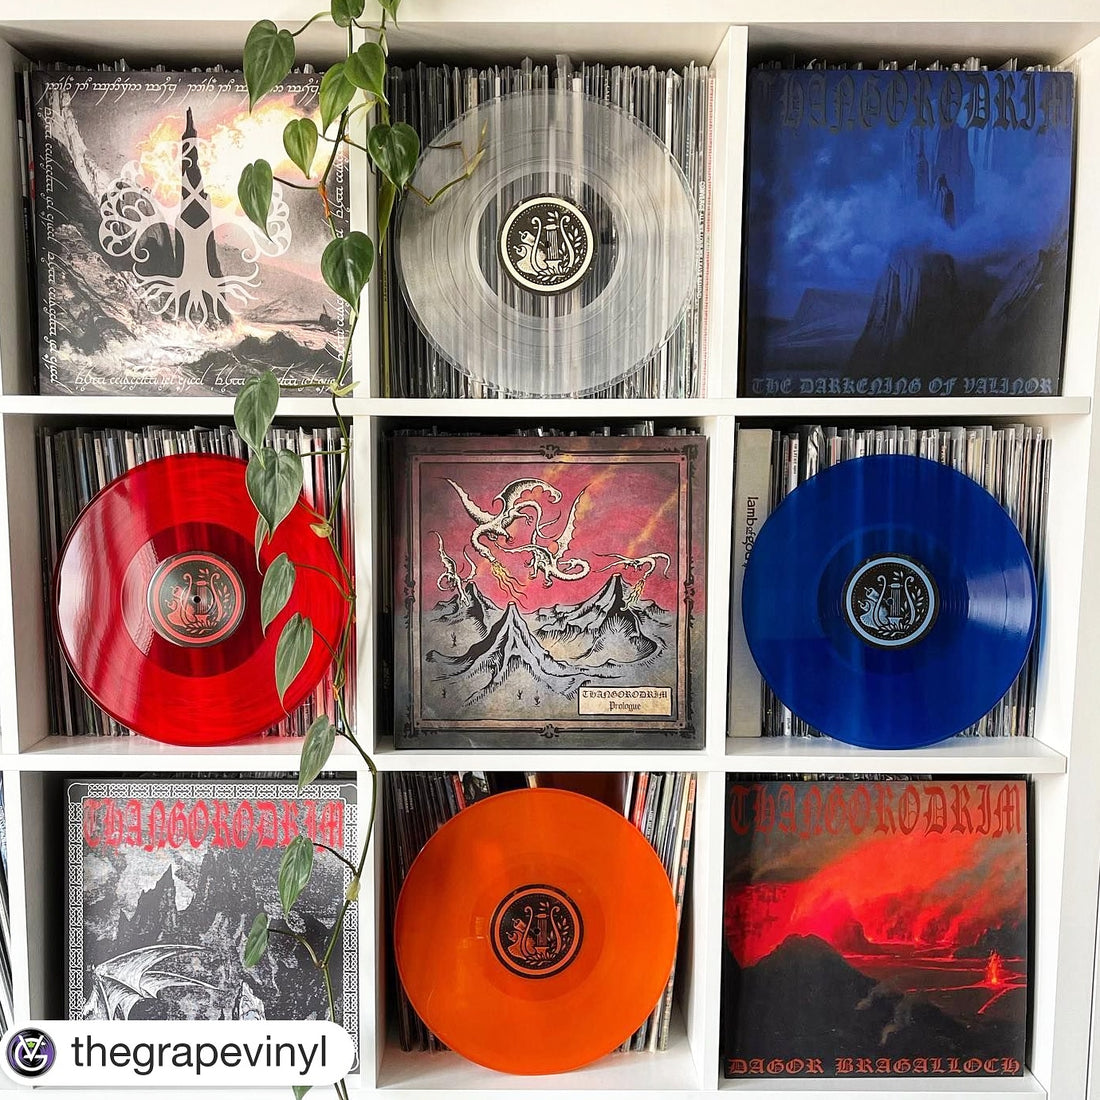 Great pic of the "Prologue" 4xLP set